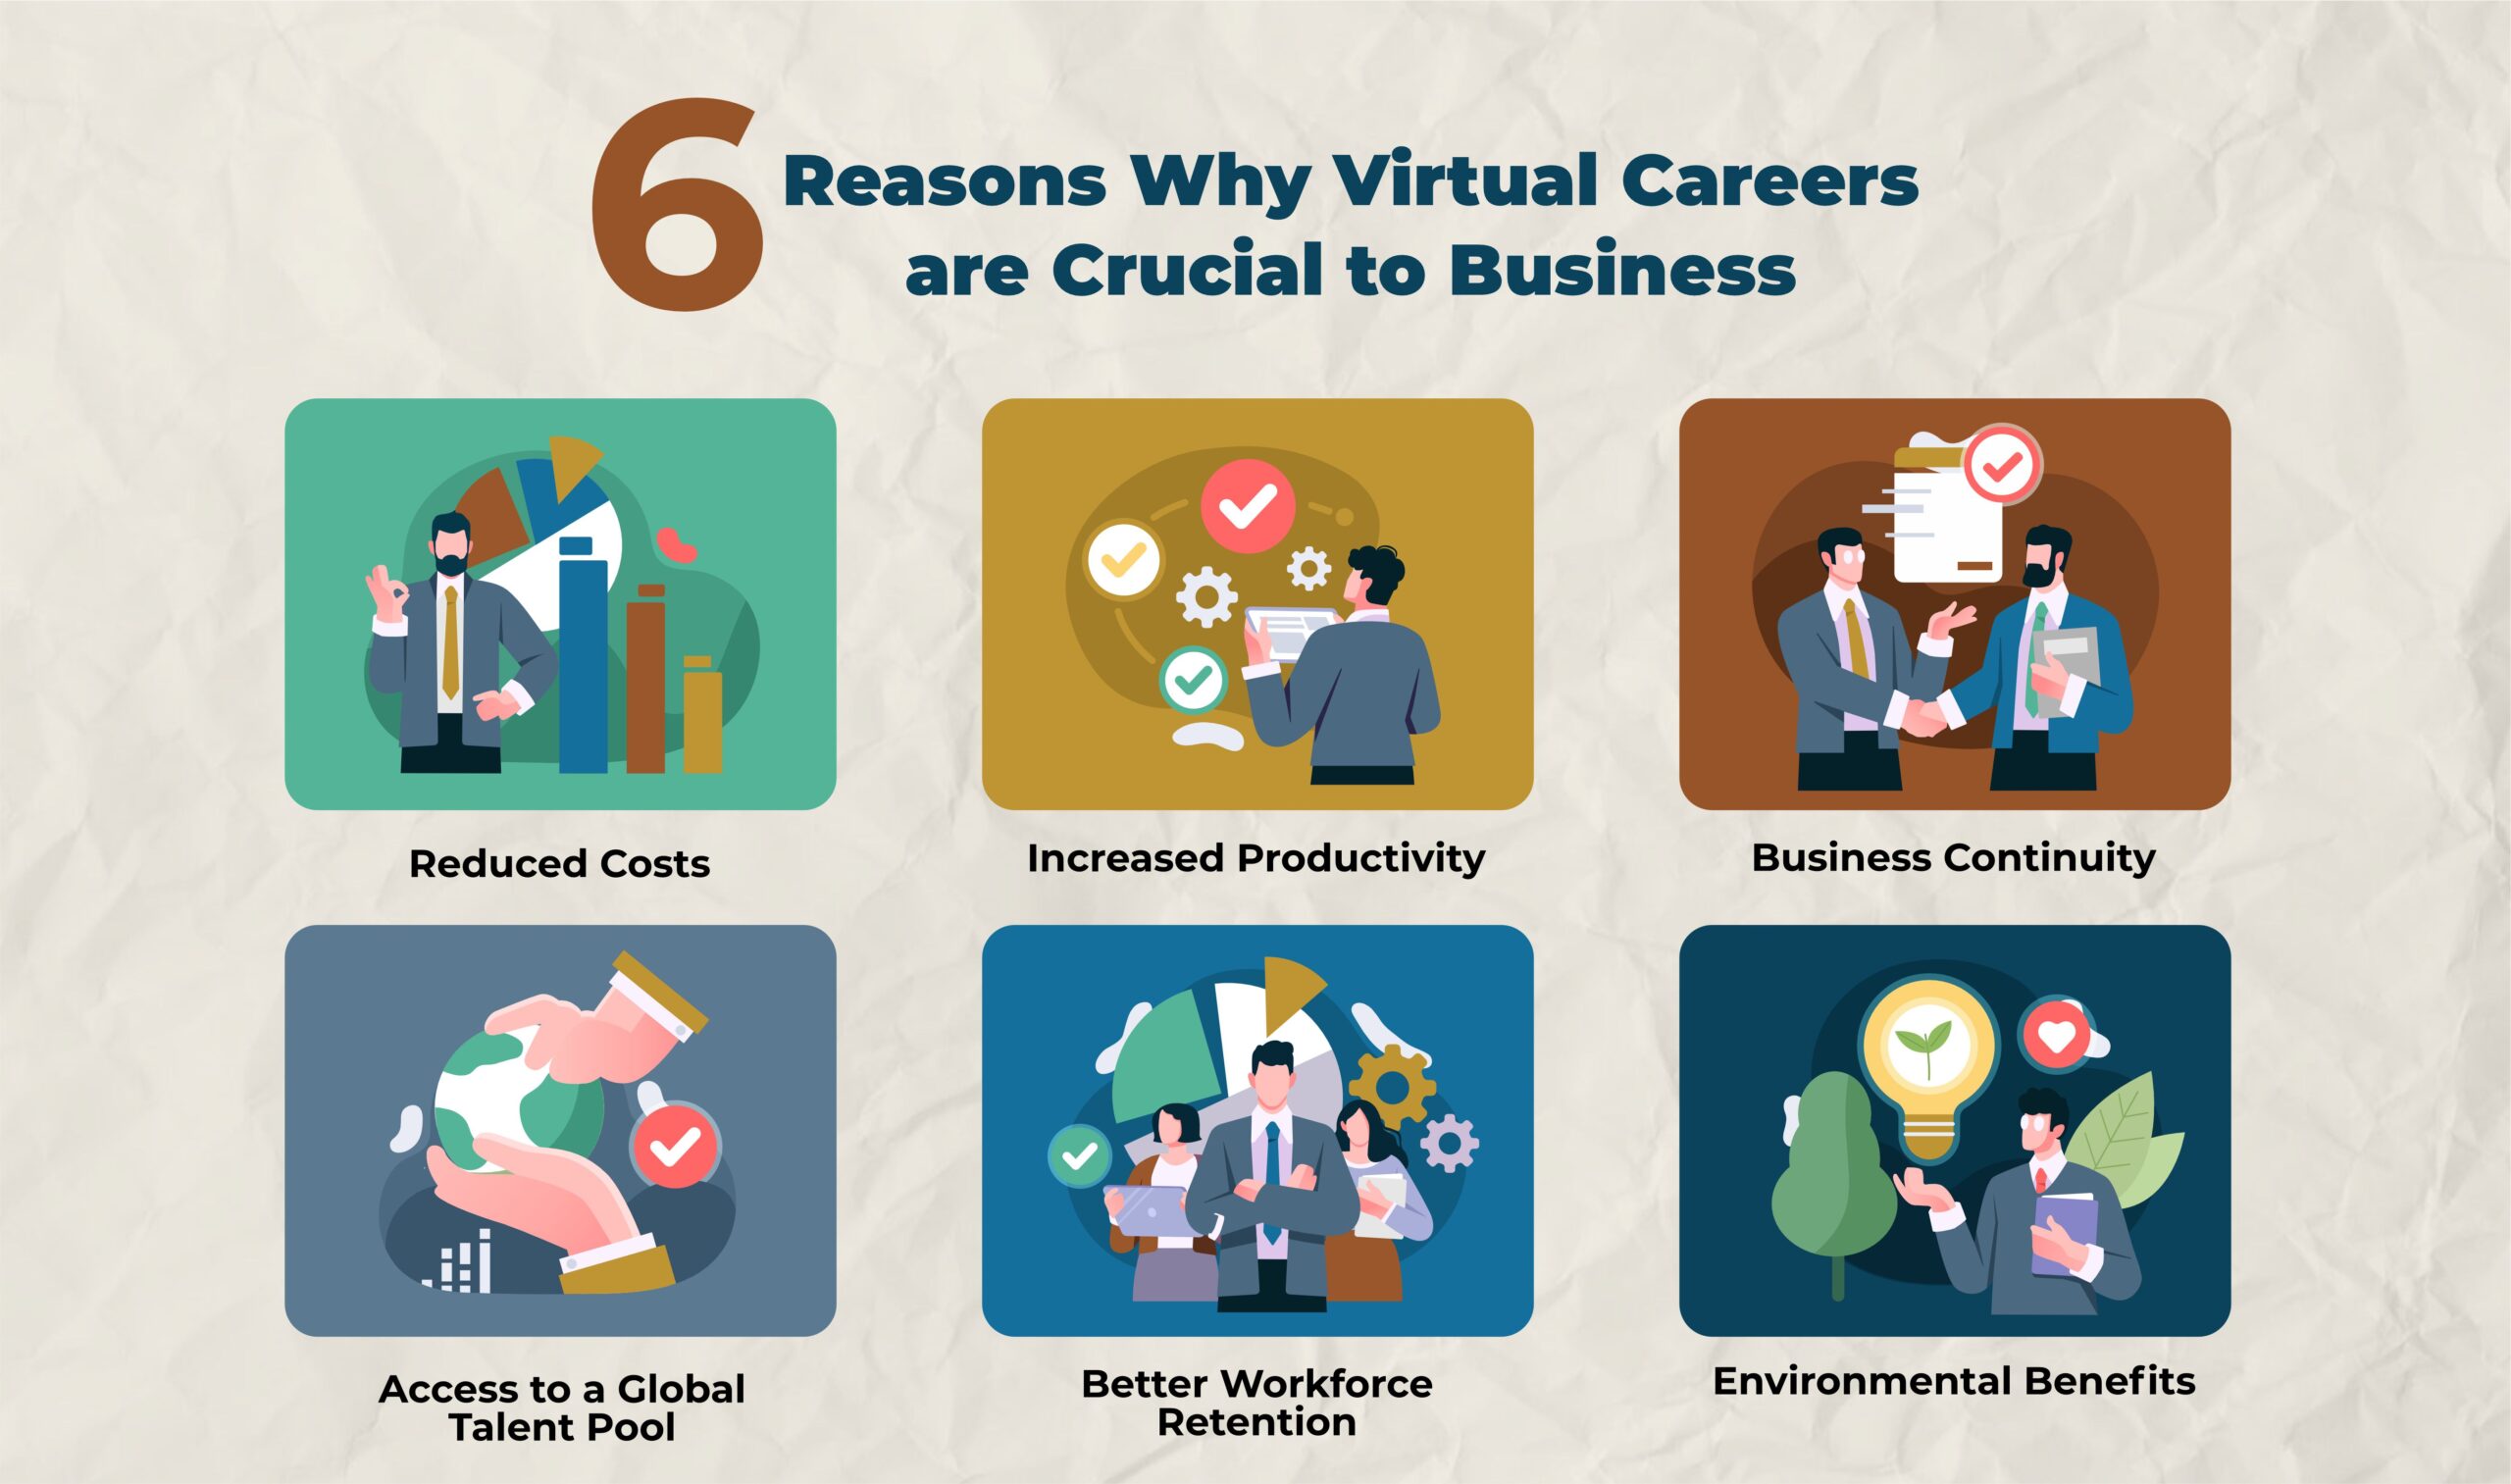 6 reasons Why Virtual Careers are Crucial to Business